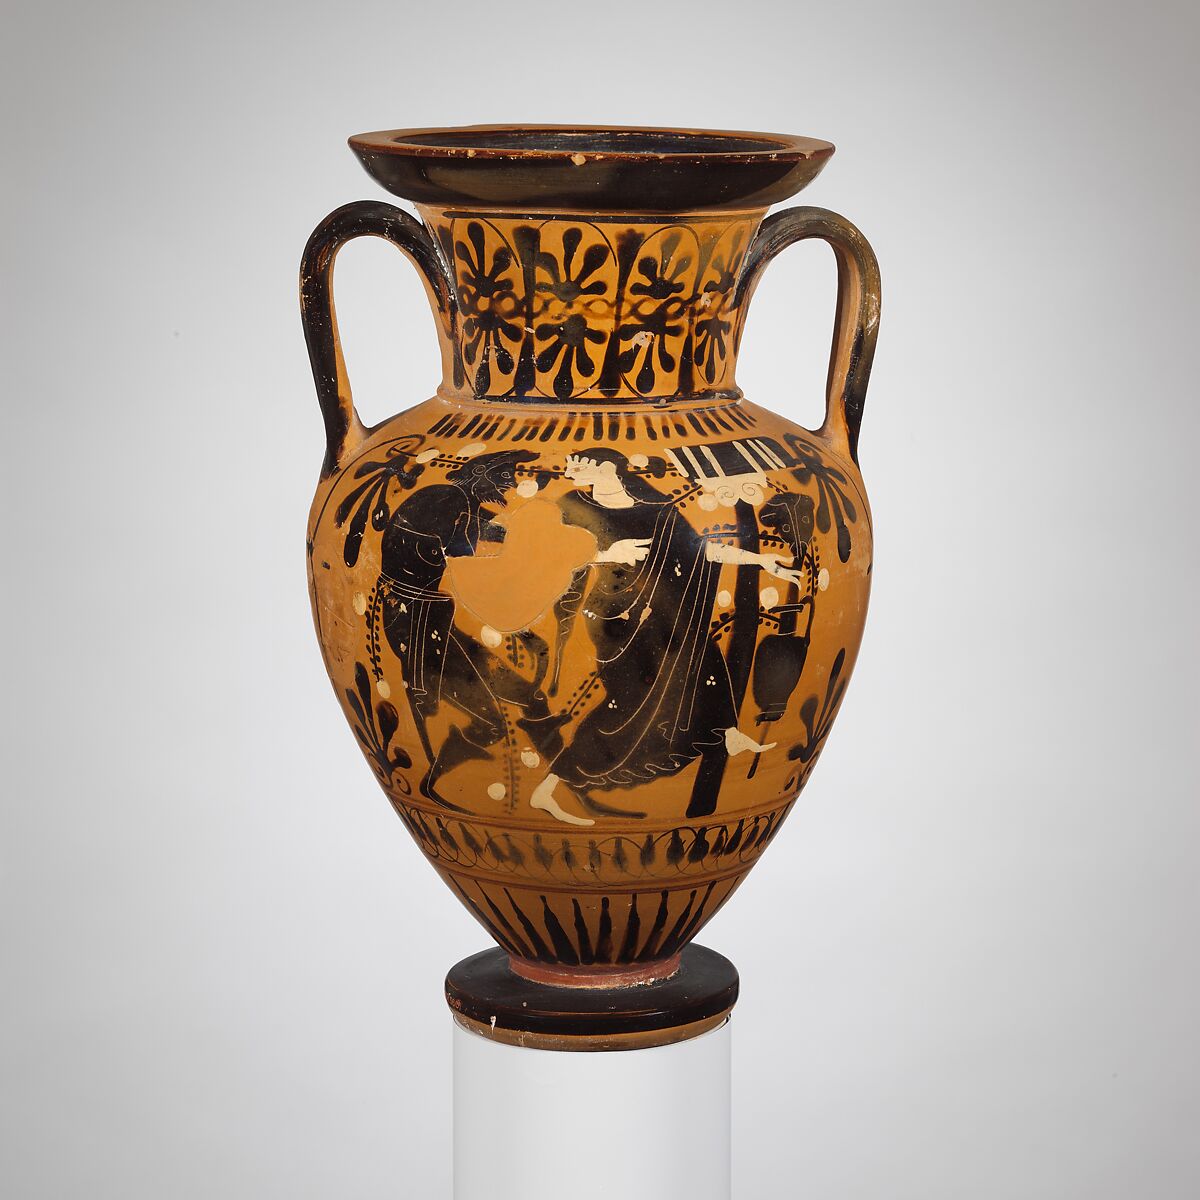 Terracotta neck-amphora, Attributed to the Red-Line Painter, Terracotta, Greek, Attic 